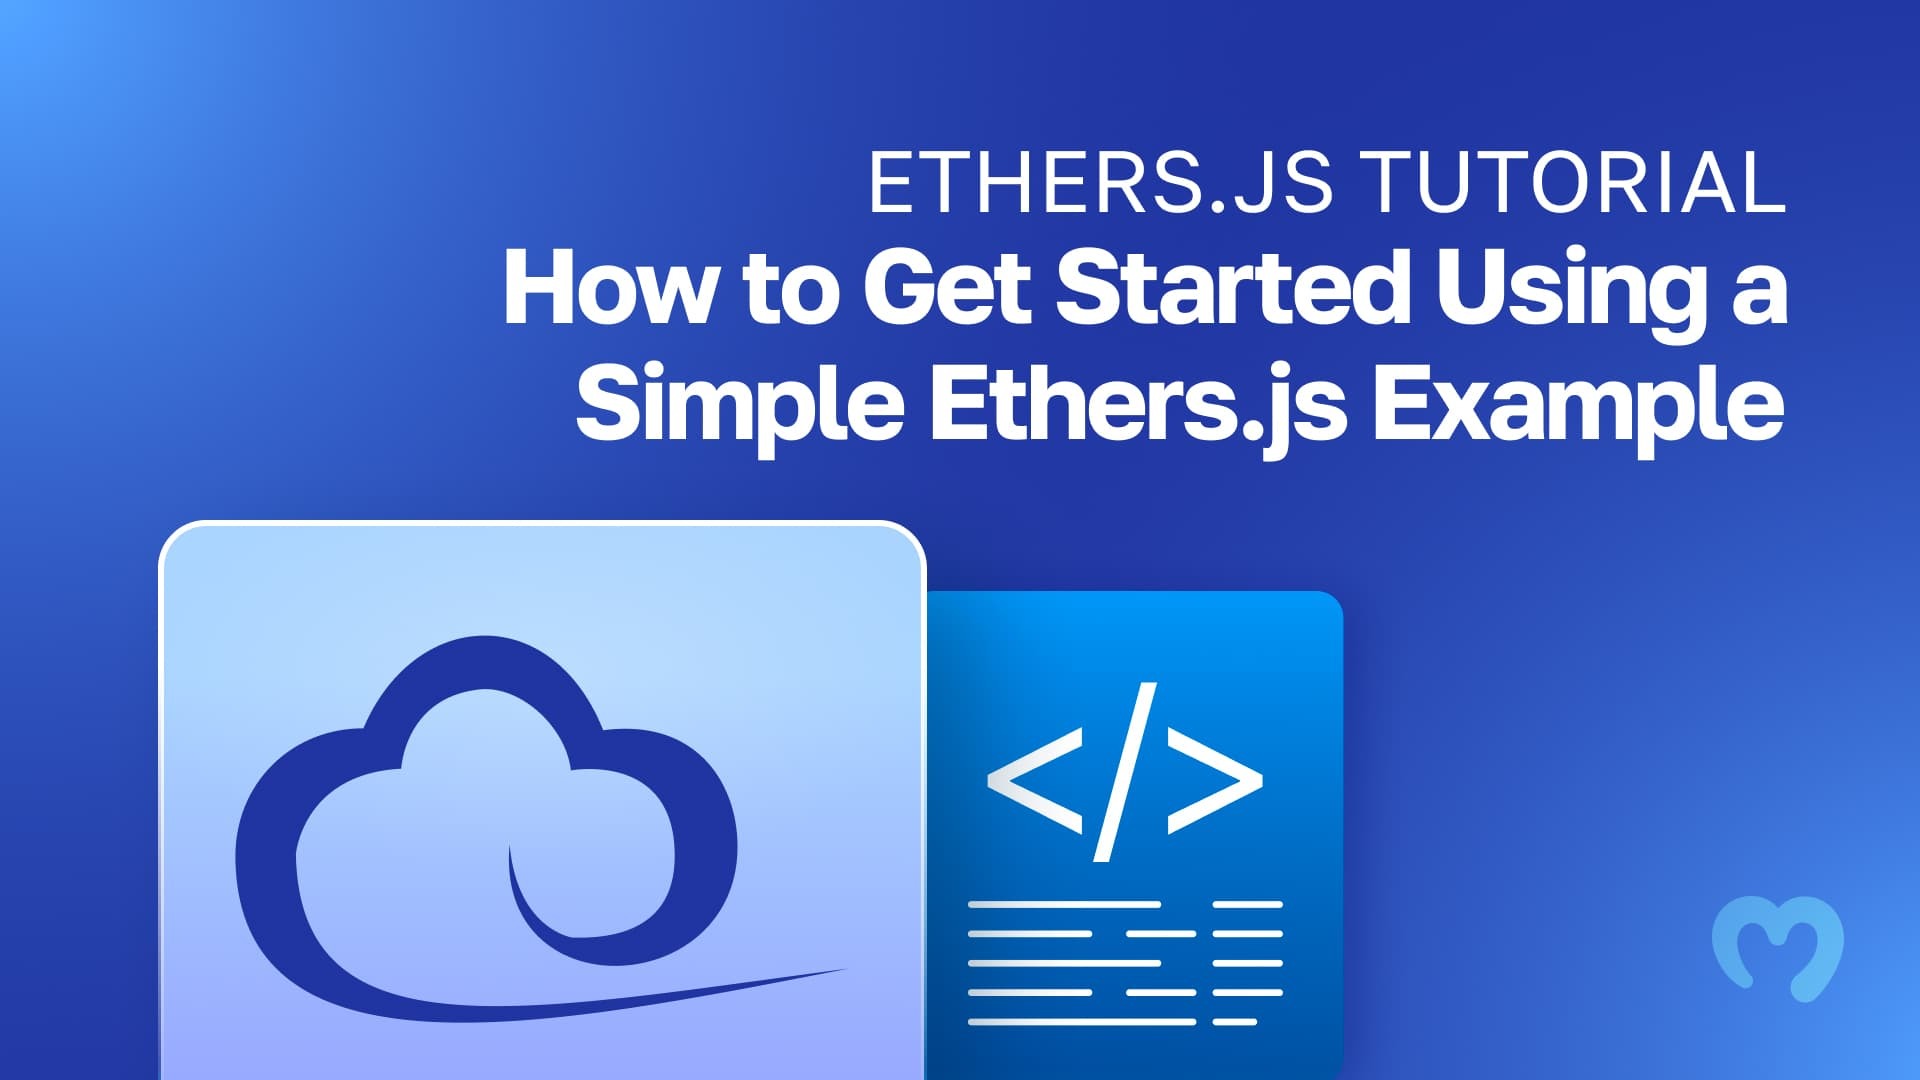 Exploring an Ethers.js Tutorial and how to get started using a simple ethers.js example